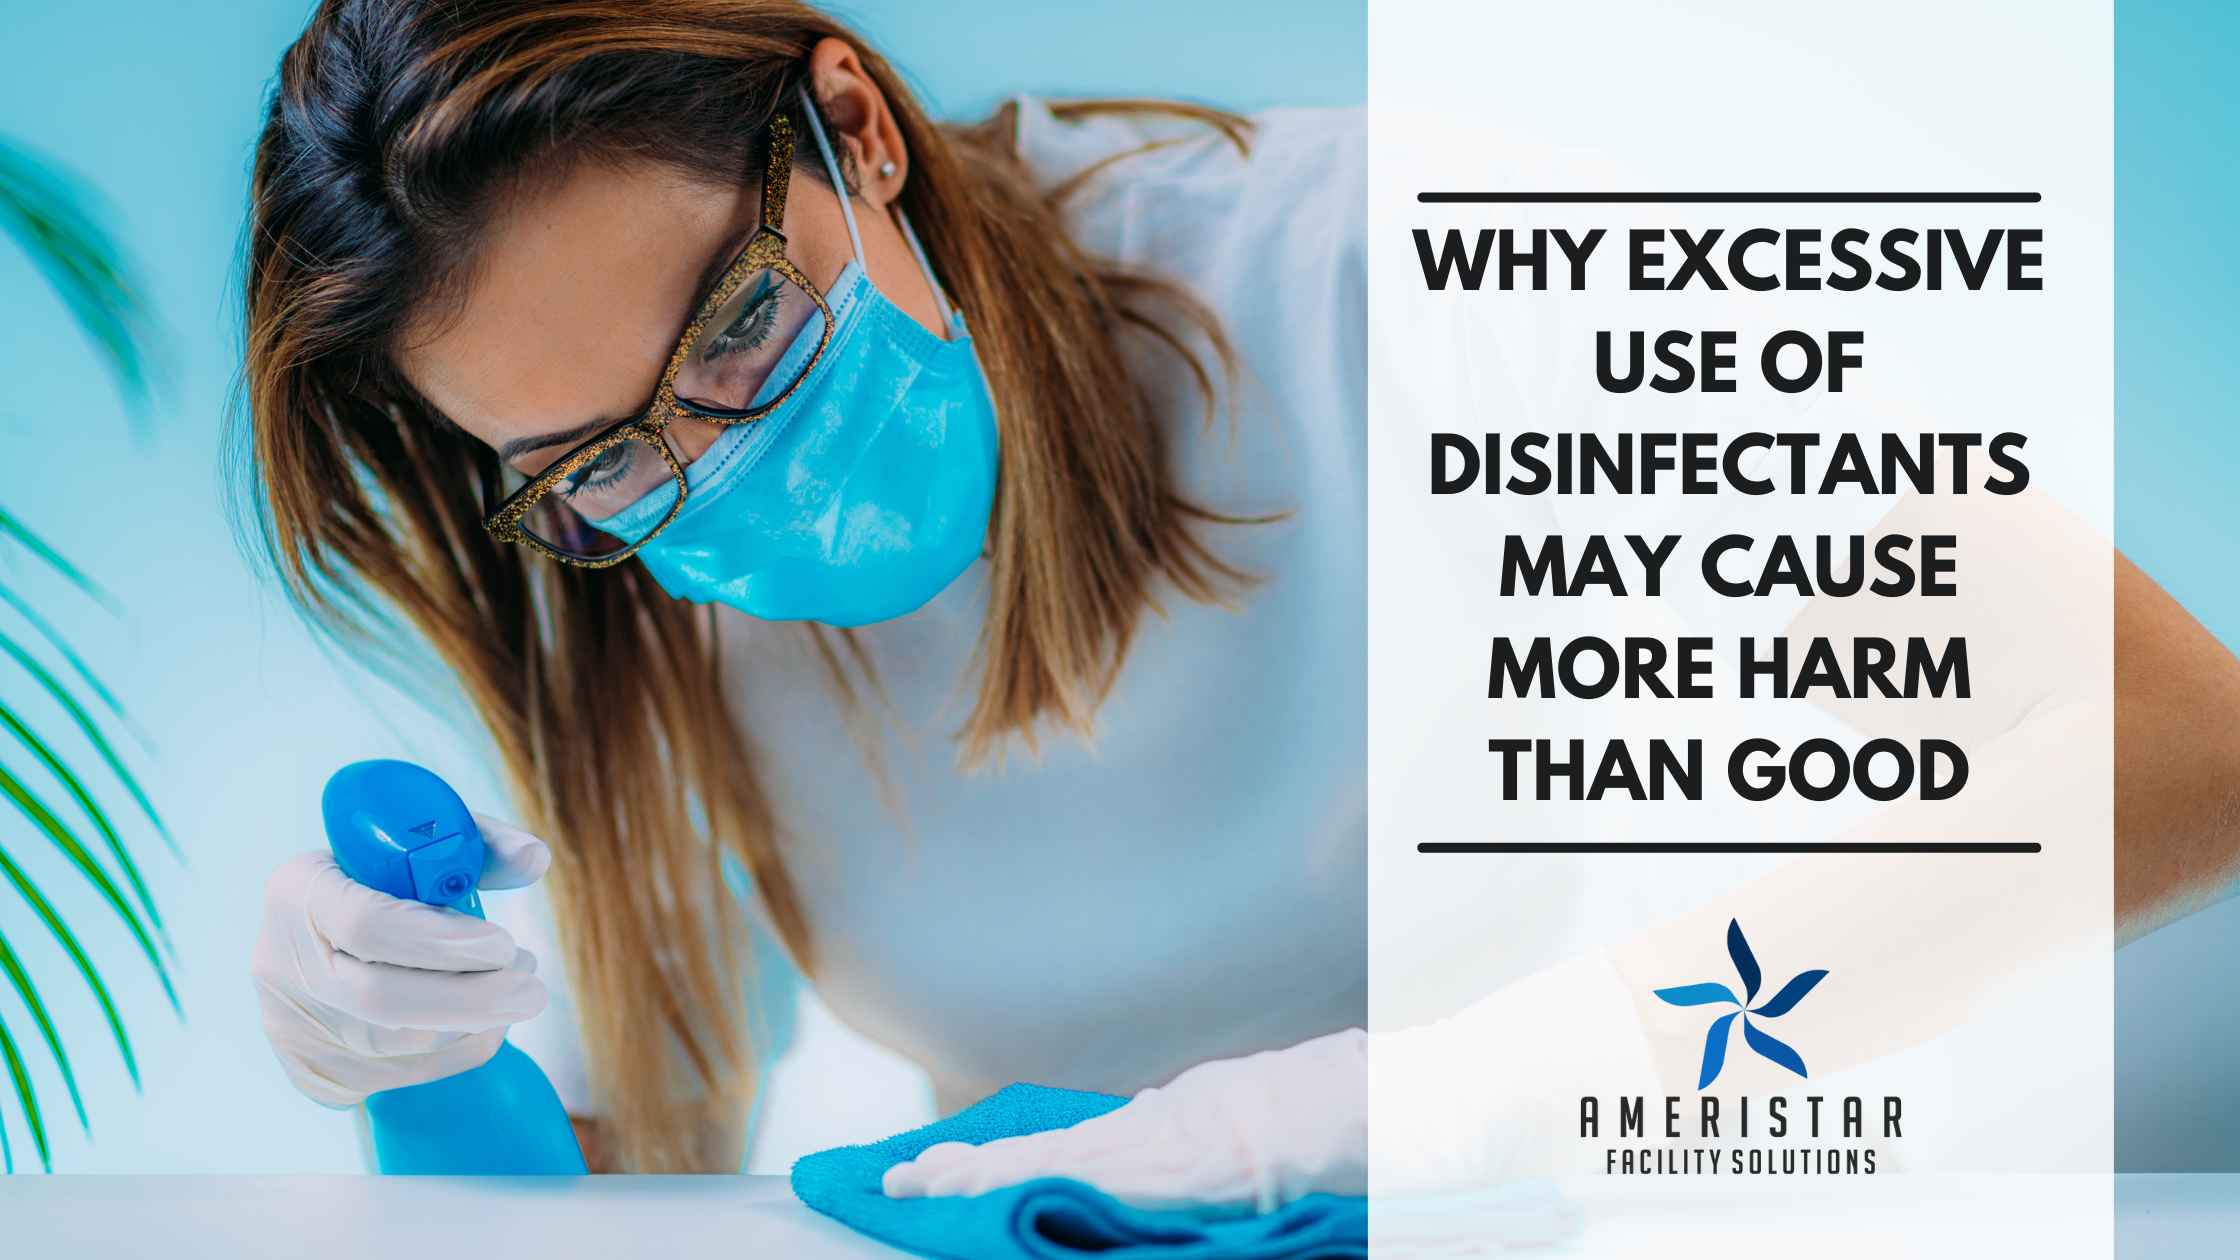 Why Excessive Use of Disinfectants May Cause More Harm than Good